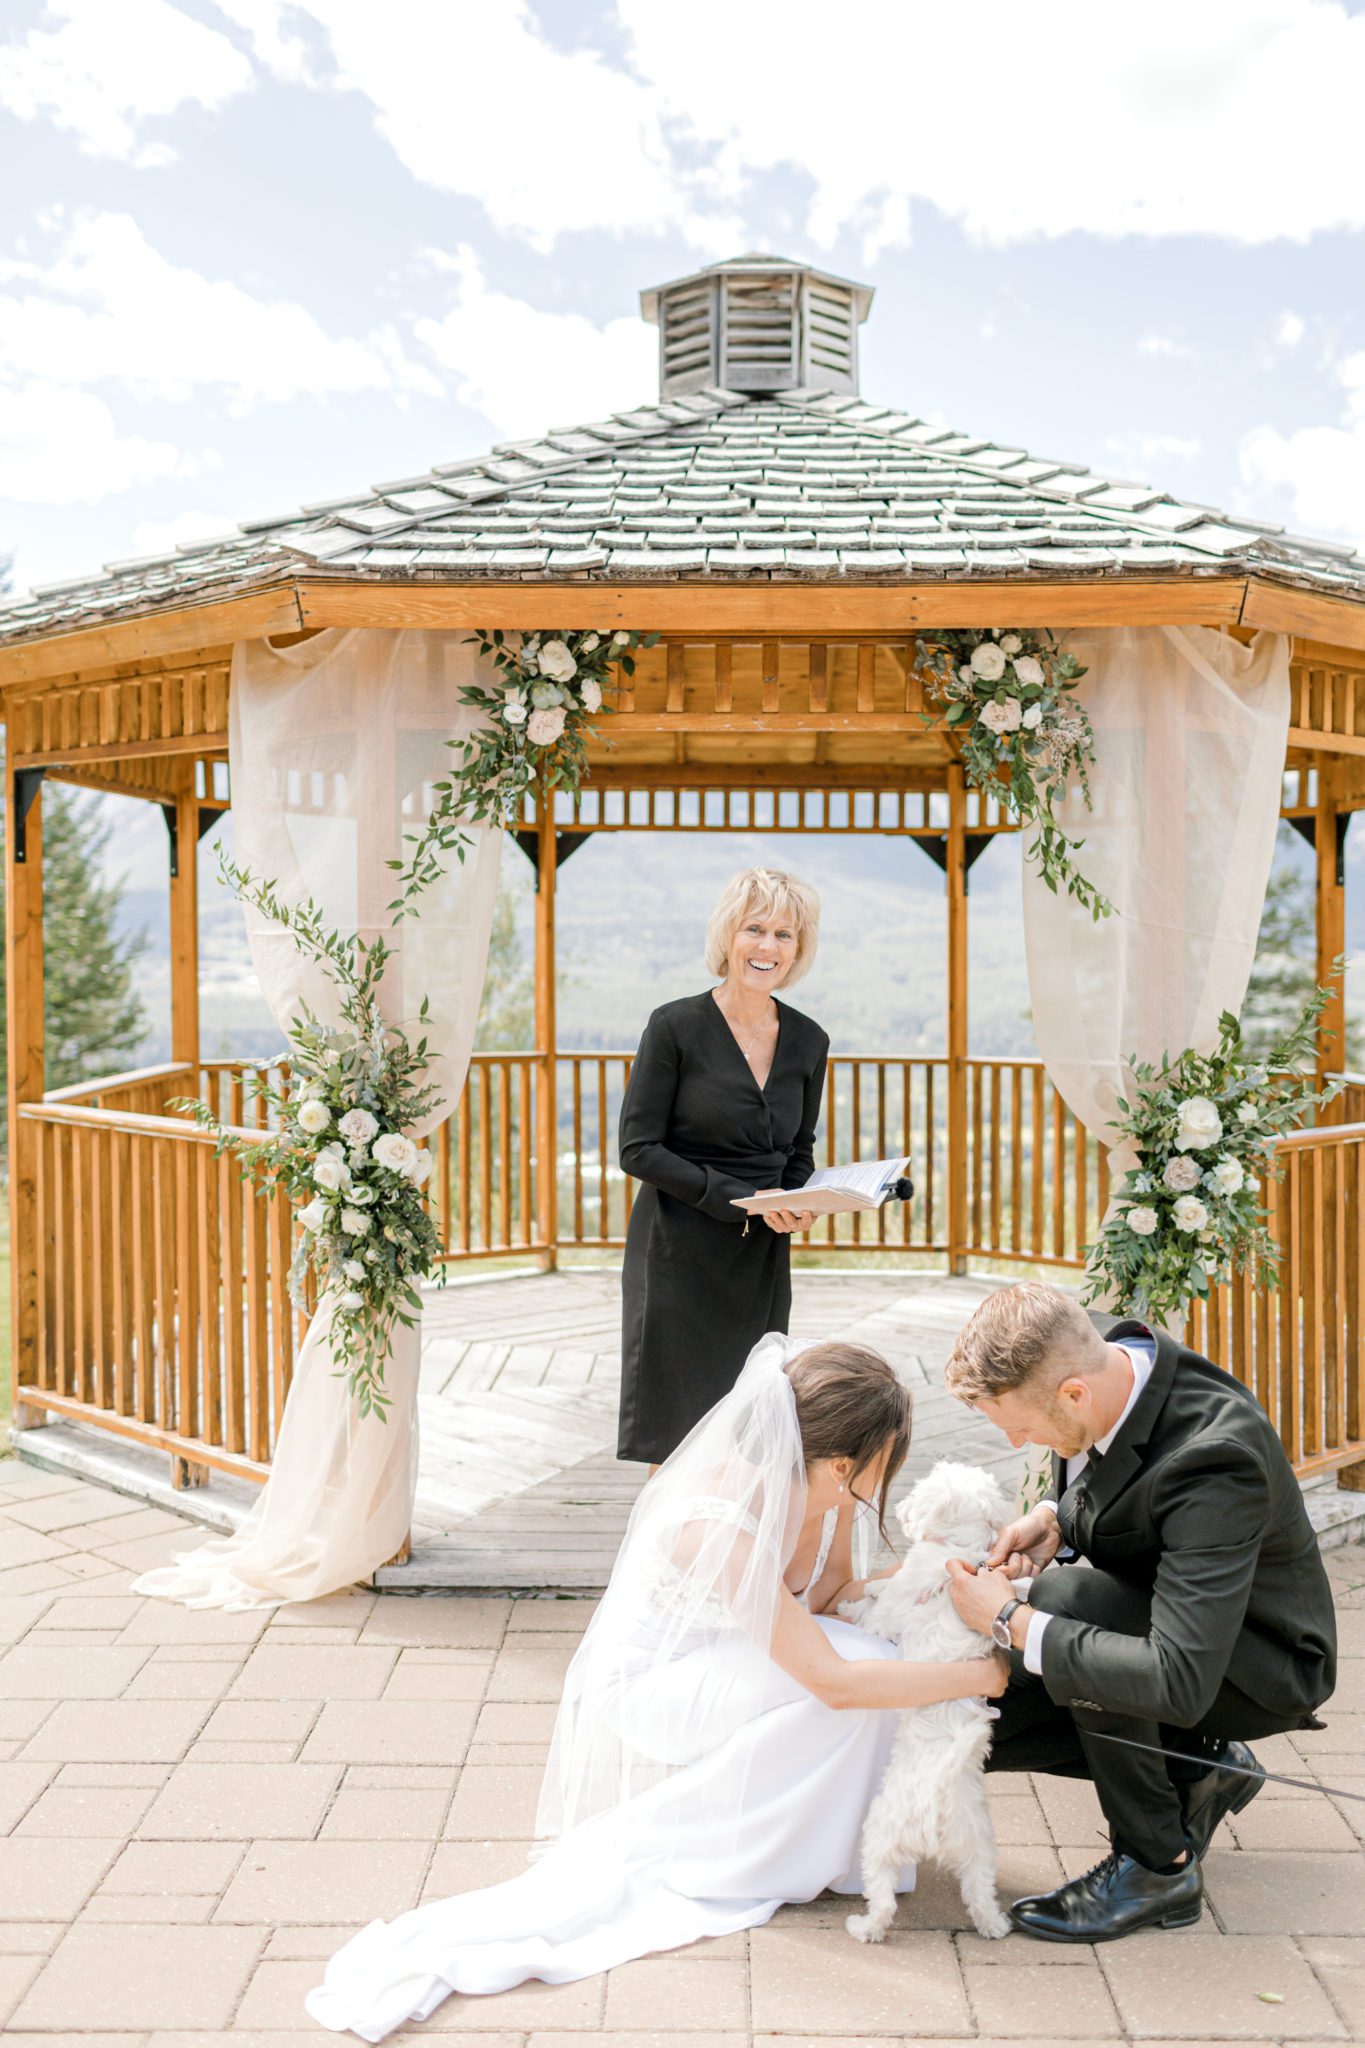 Intimate outdoor gazebo wedding in Canmore, Alberta. Bride and groom involving dog in ceremony.